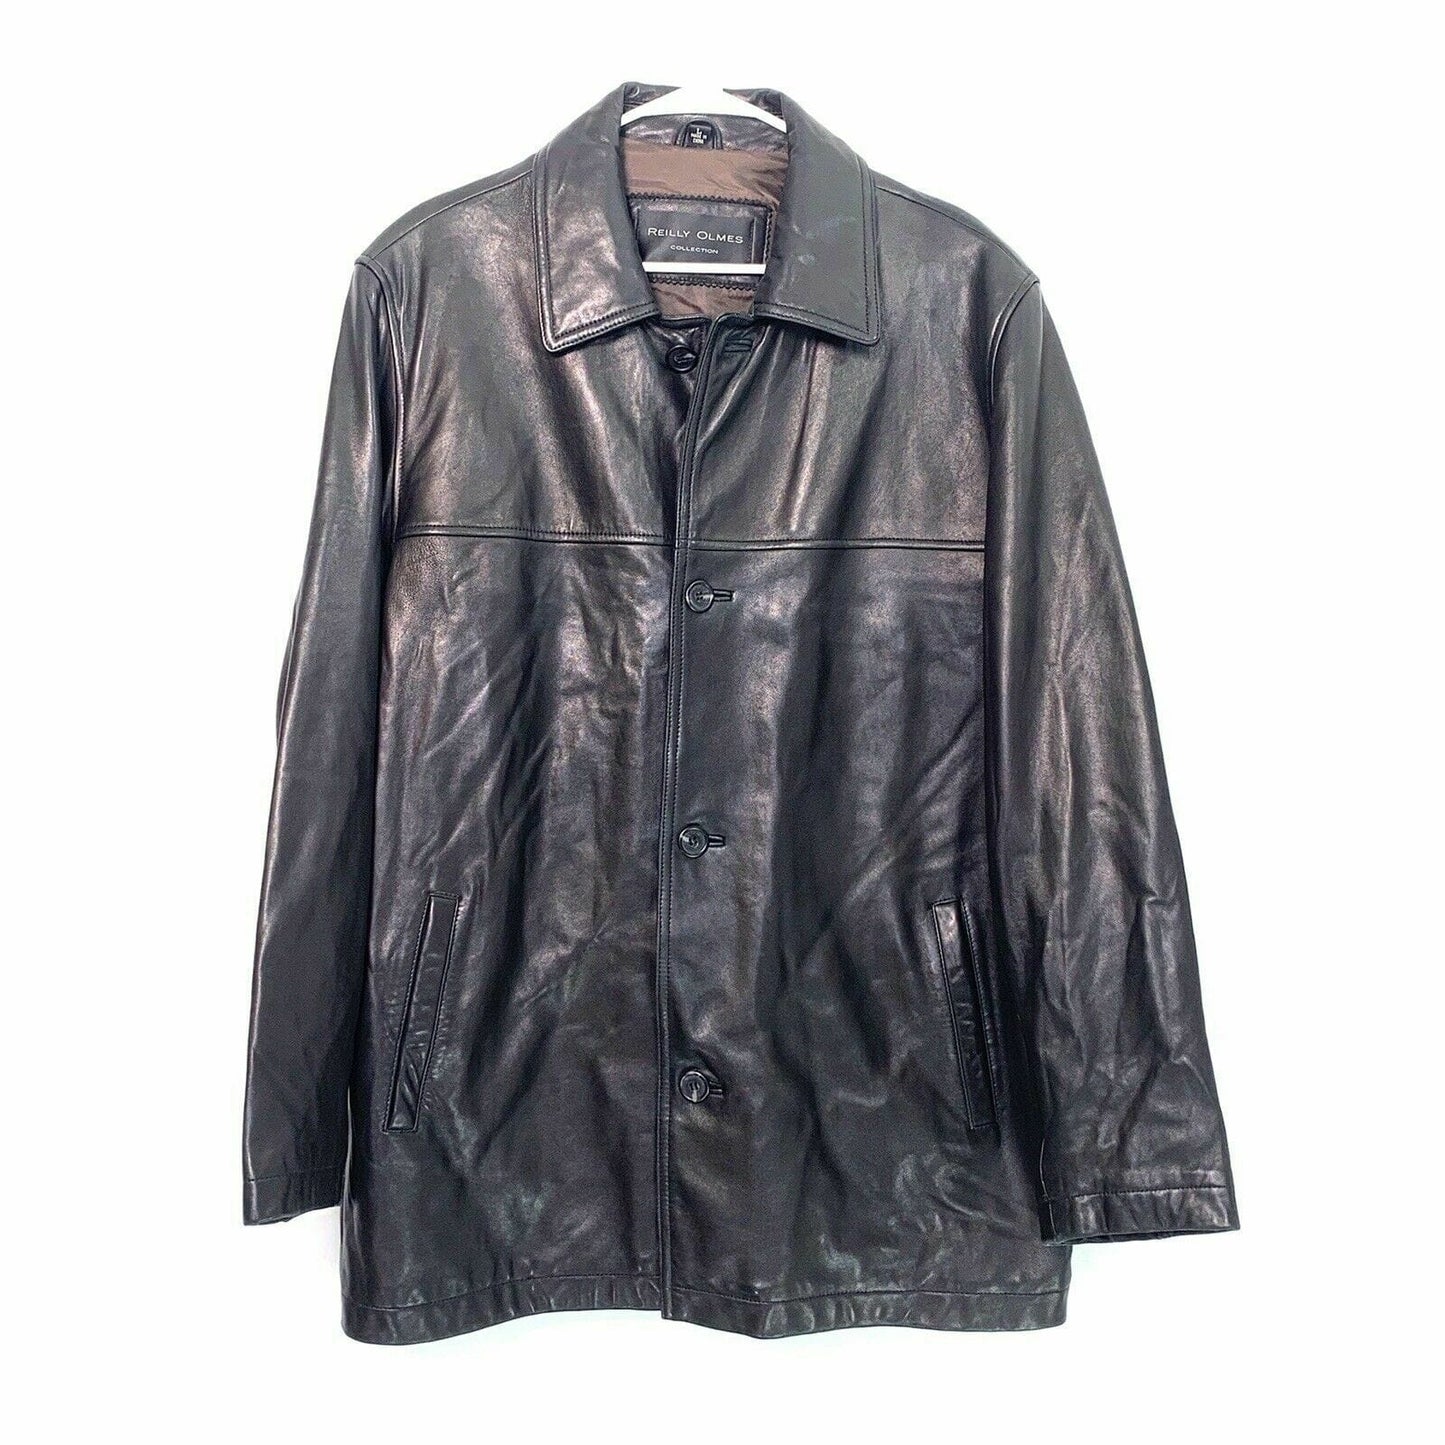 Reilly Olmes Collection Mens Lined Butter Soft Leather Jacket, Black - Size L - parsimonyshoppes